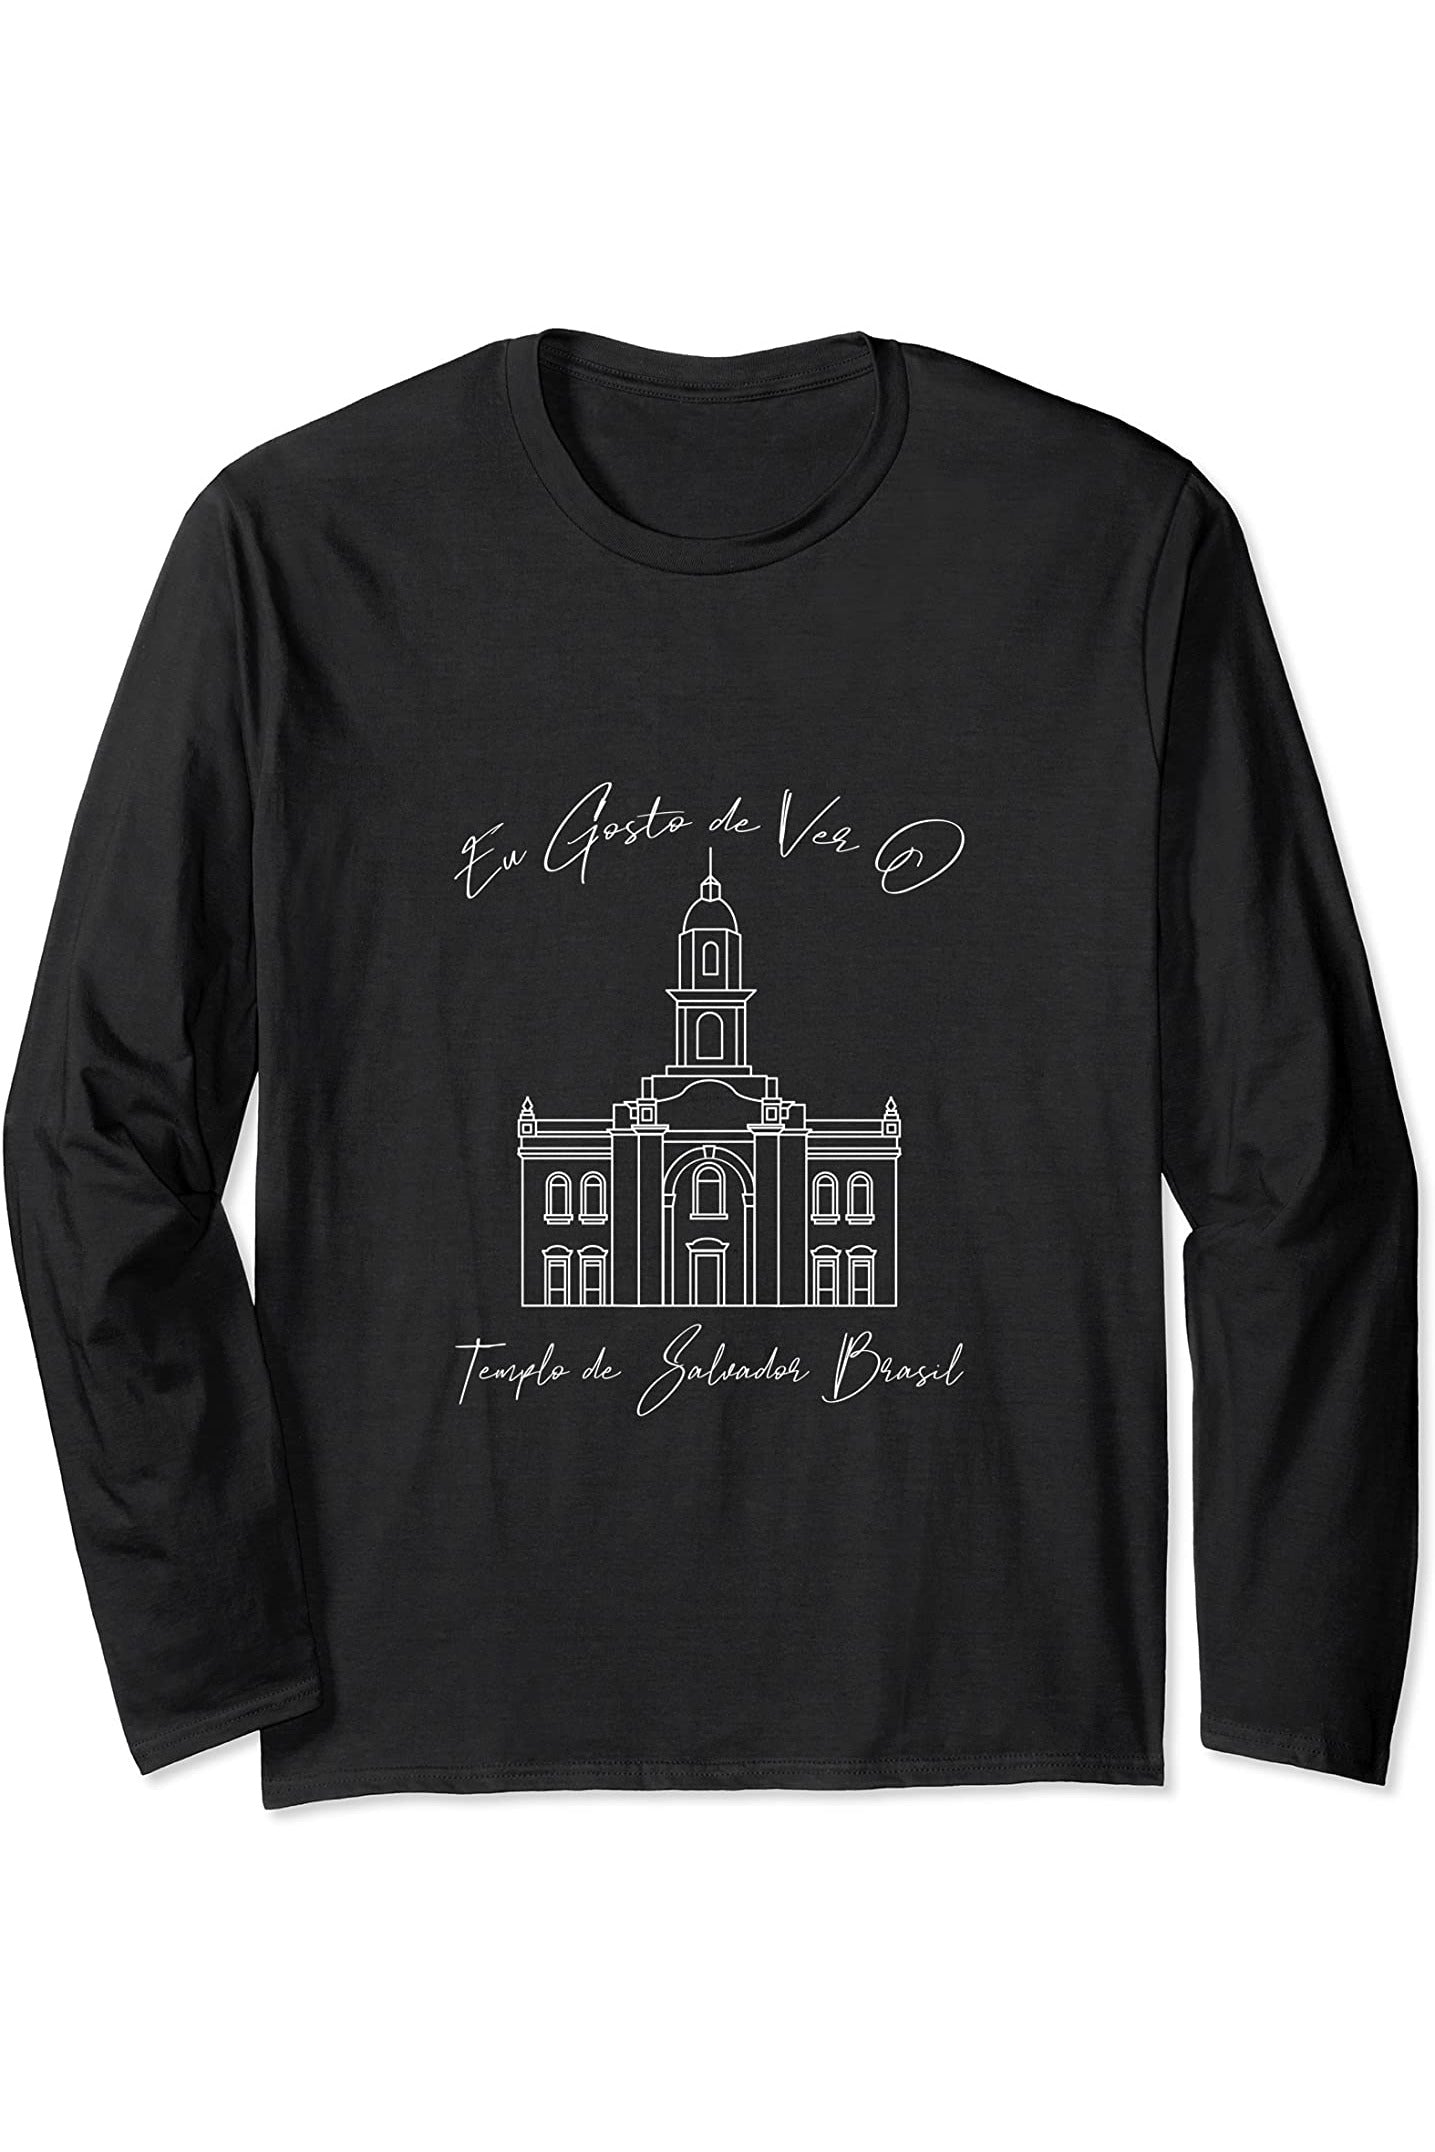 Salvador Brazil Temple Long Sleeve T-Shirt - Calligraphy Style (Portuguese) US